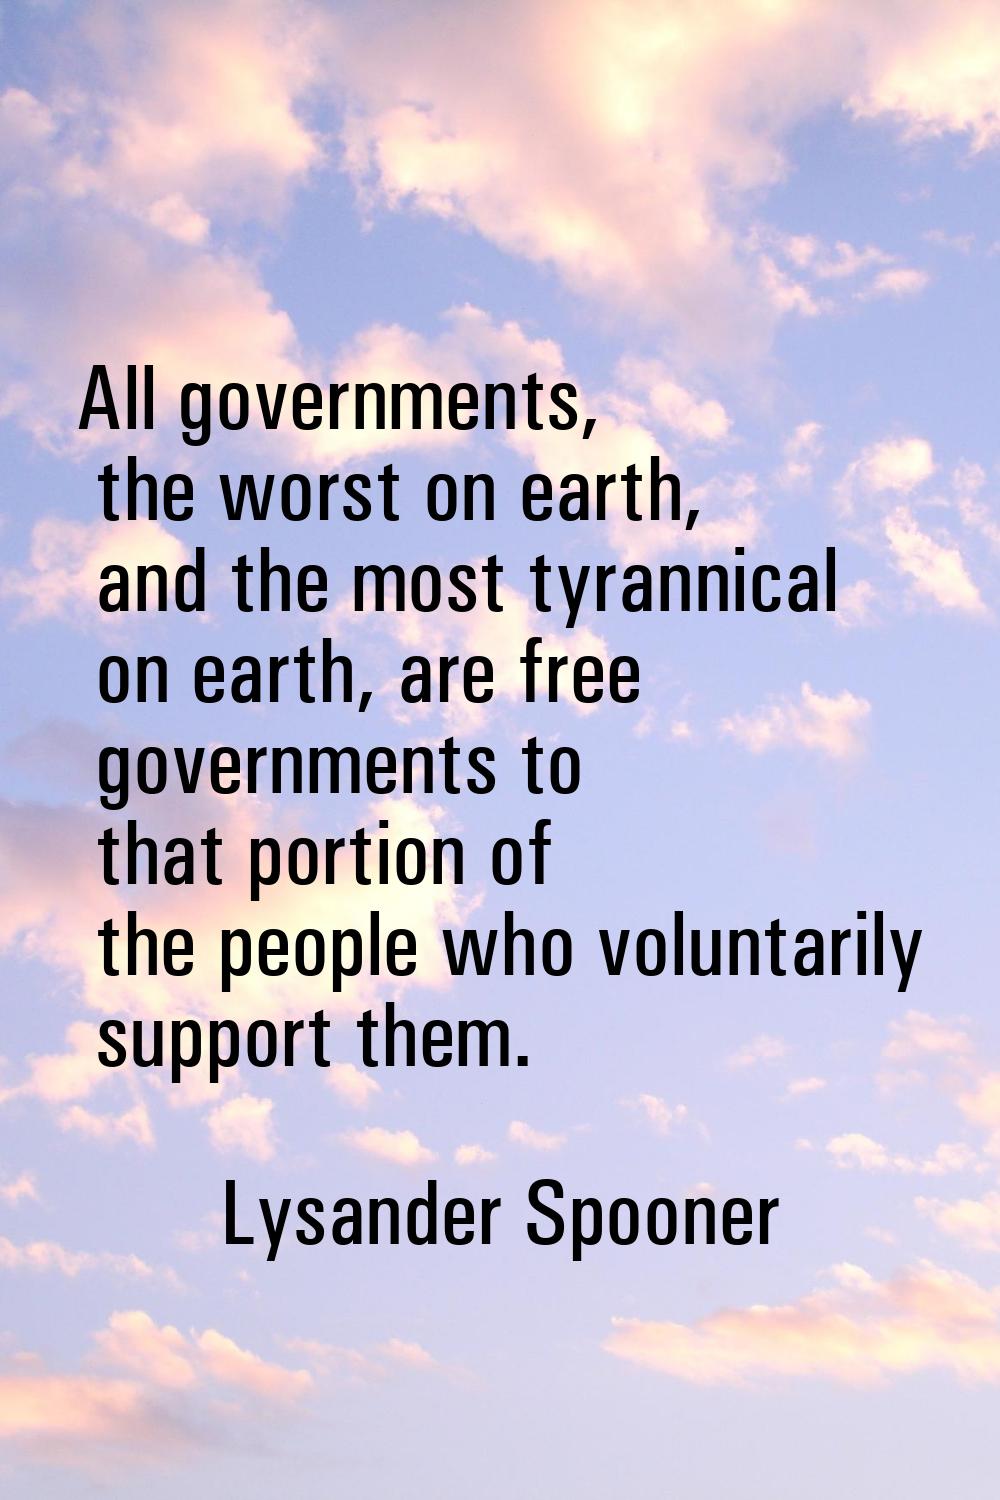 All governments, the worst on earth, and the most tyrannical on earth, are free governments to that